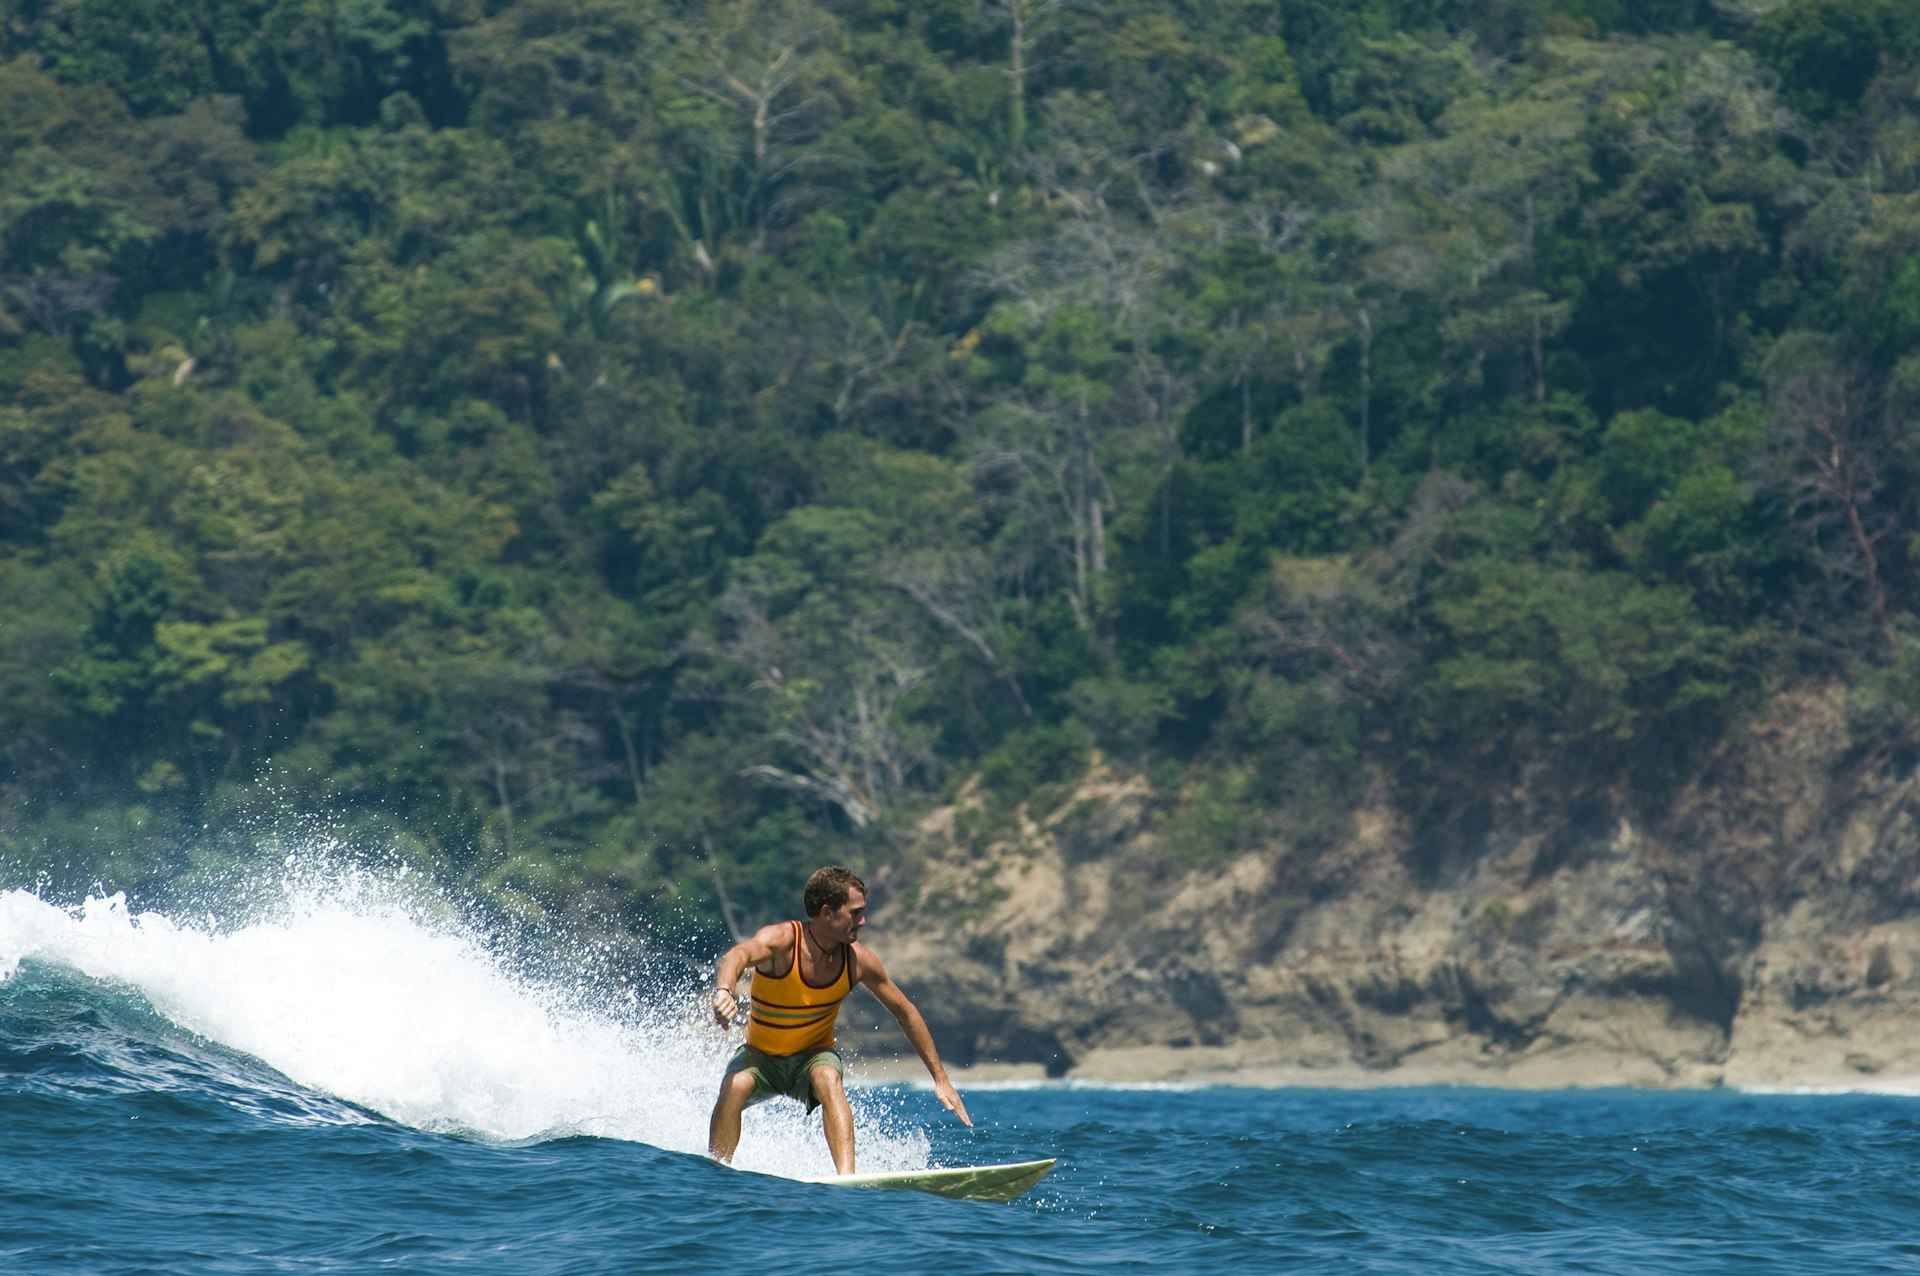 Features - A young man surfing in Costa Rica